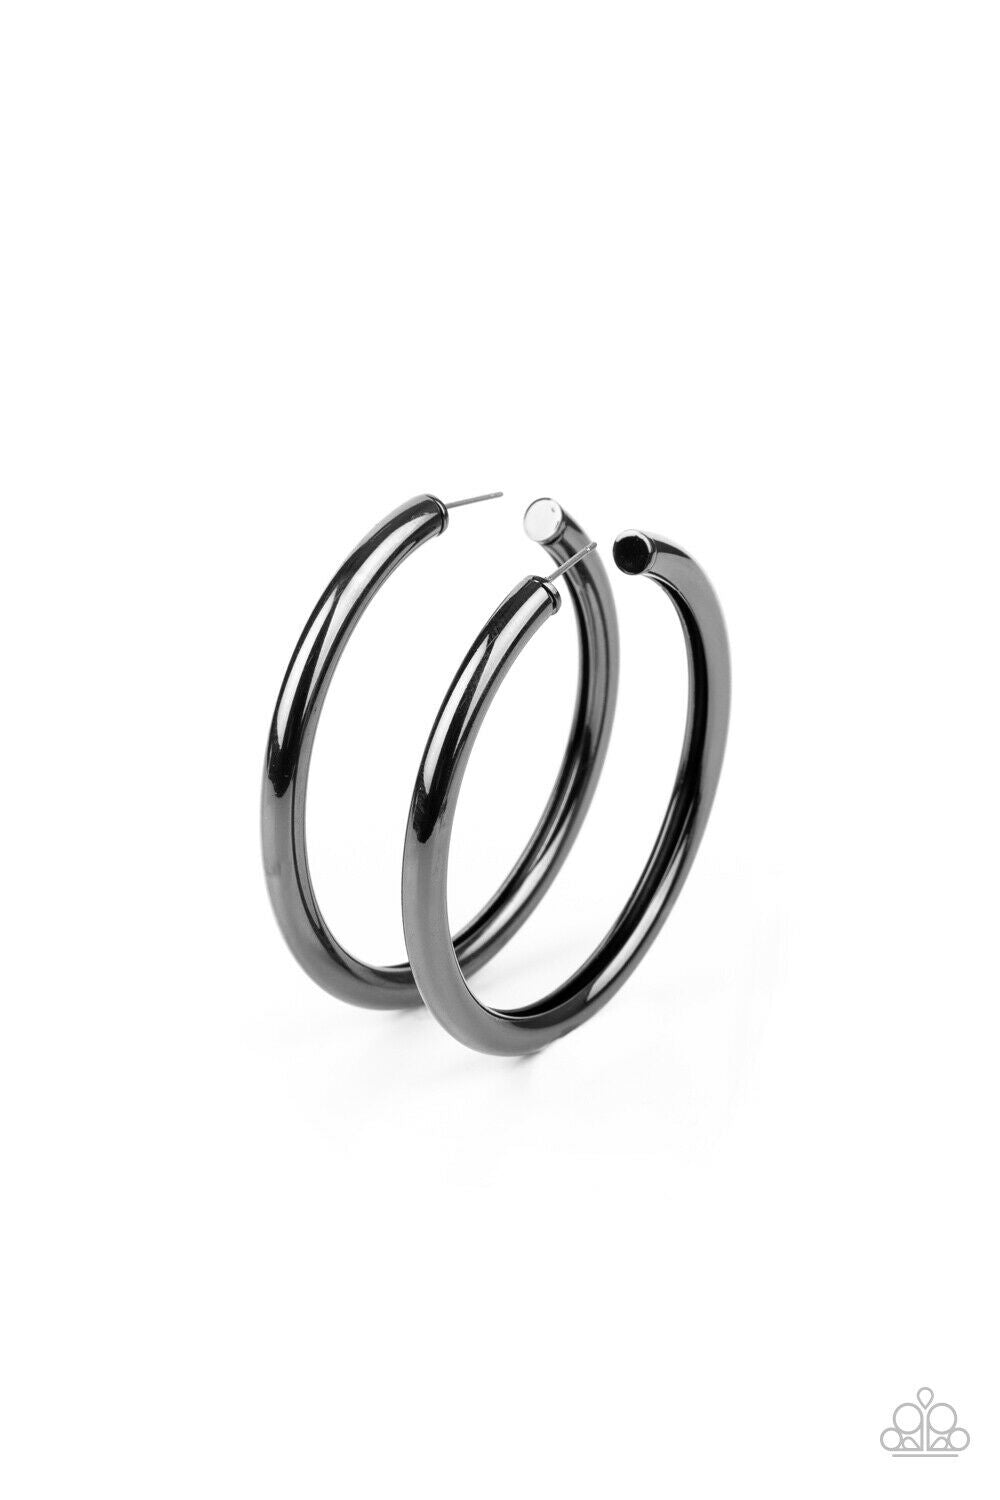 Item #P5HO-SVXX-227XX Featuring shimmery diamond-cut texture, a glistening silver bar lines the center of a beveled gold hoop, creating an edgy stacked look. Earring attaches to a standard post fitting. Hoop measures approximately 2 1/2" in diameter.  Sold as one pair of hoop earrings.